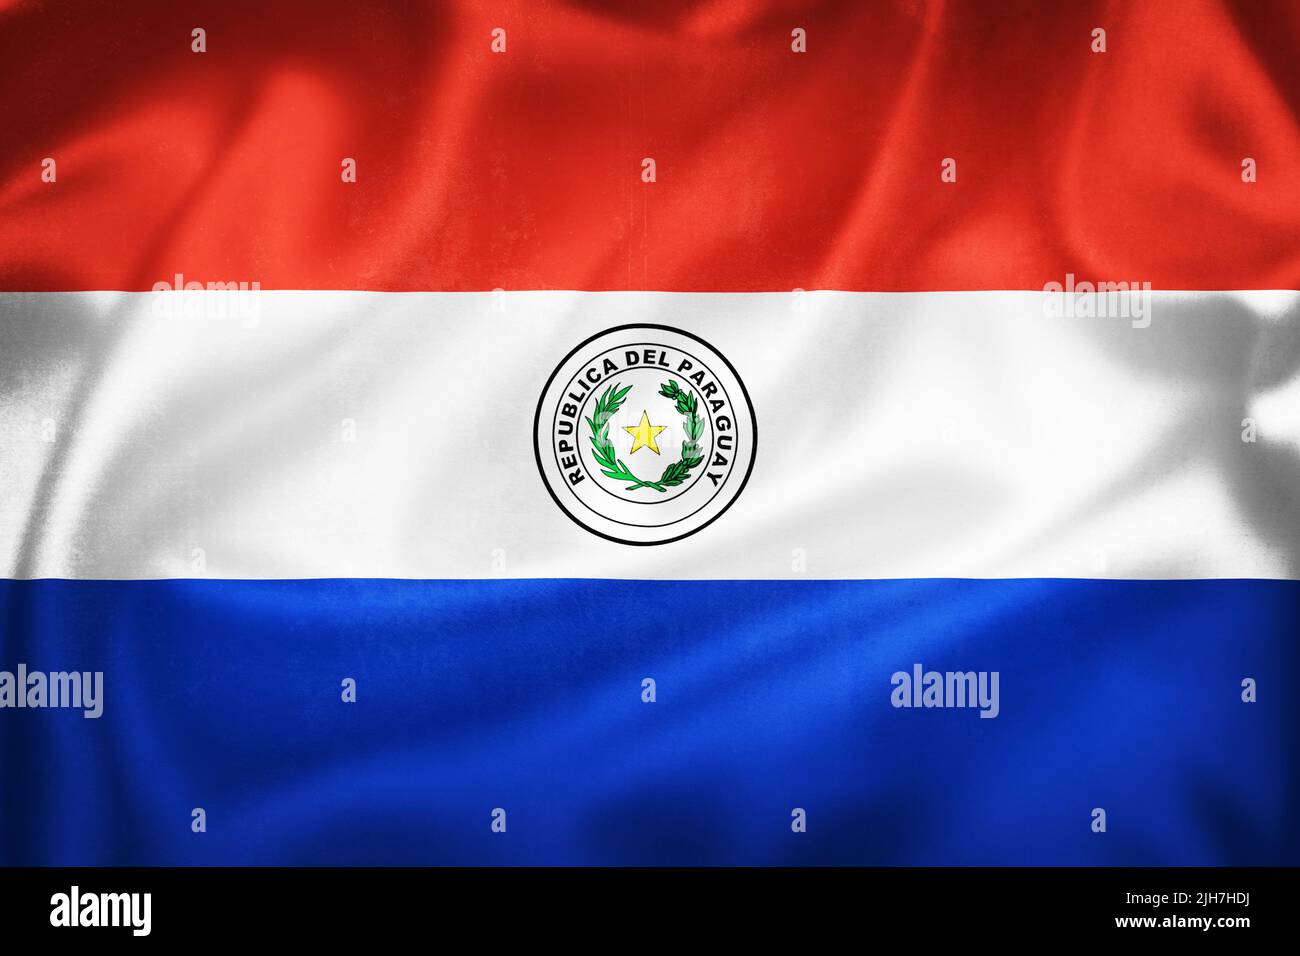 Grunge 3D illustration of Paraguay flag, concept of Paraguay Stock Photo